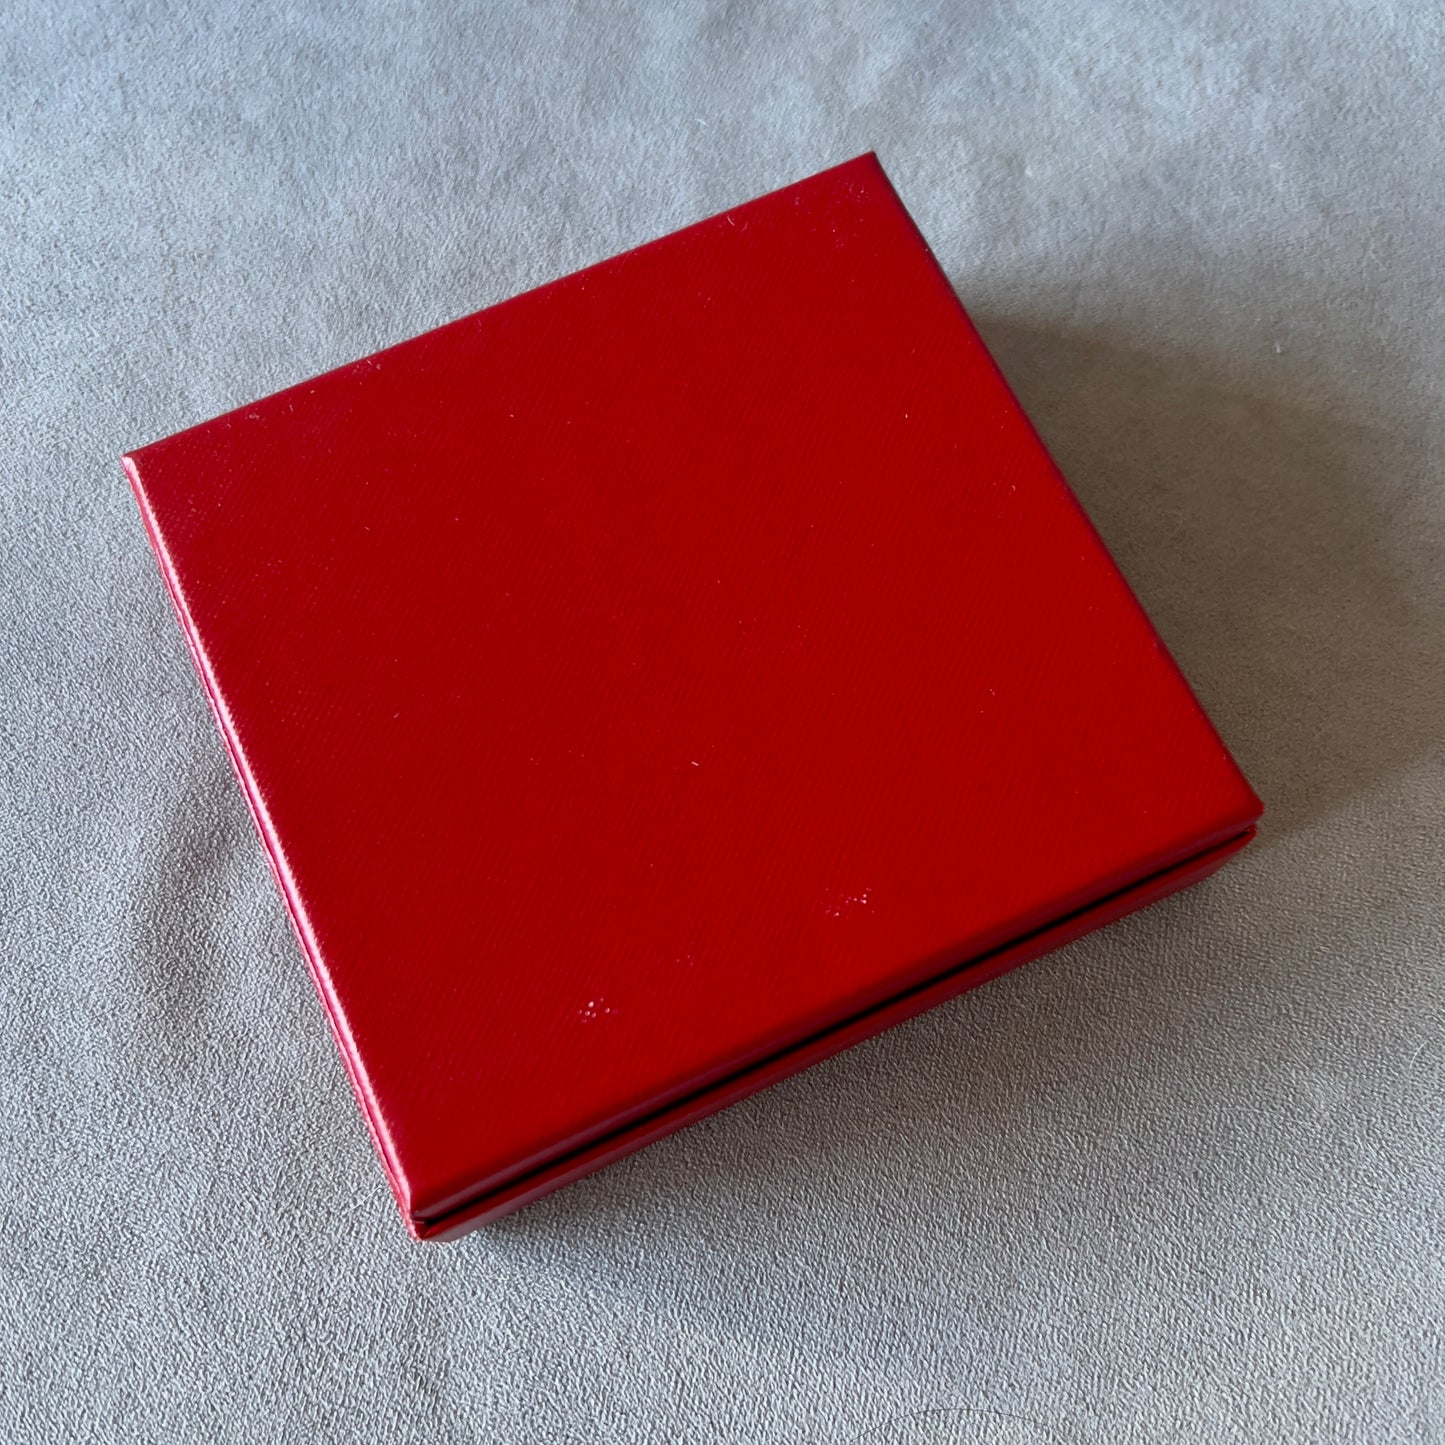 CARTIER Goods Box + Wrapping Cloth + Filled Certificate Card